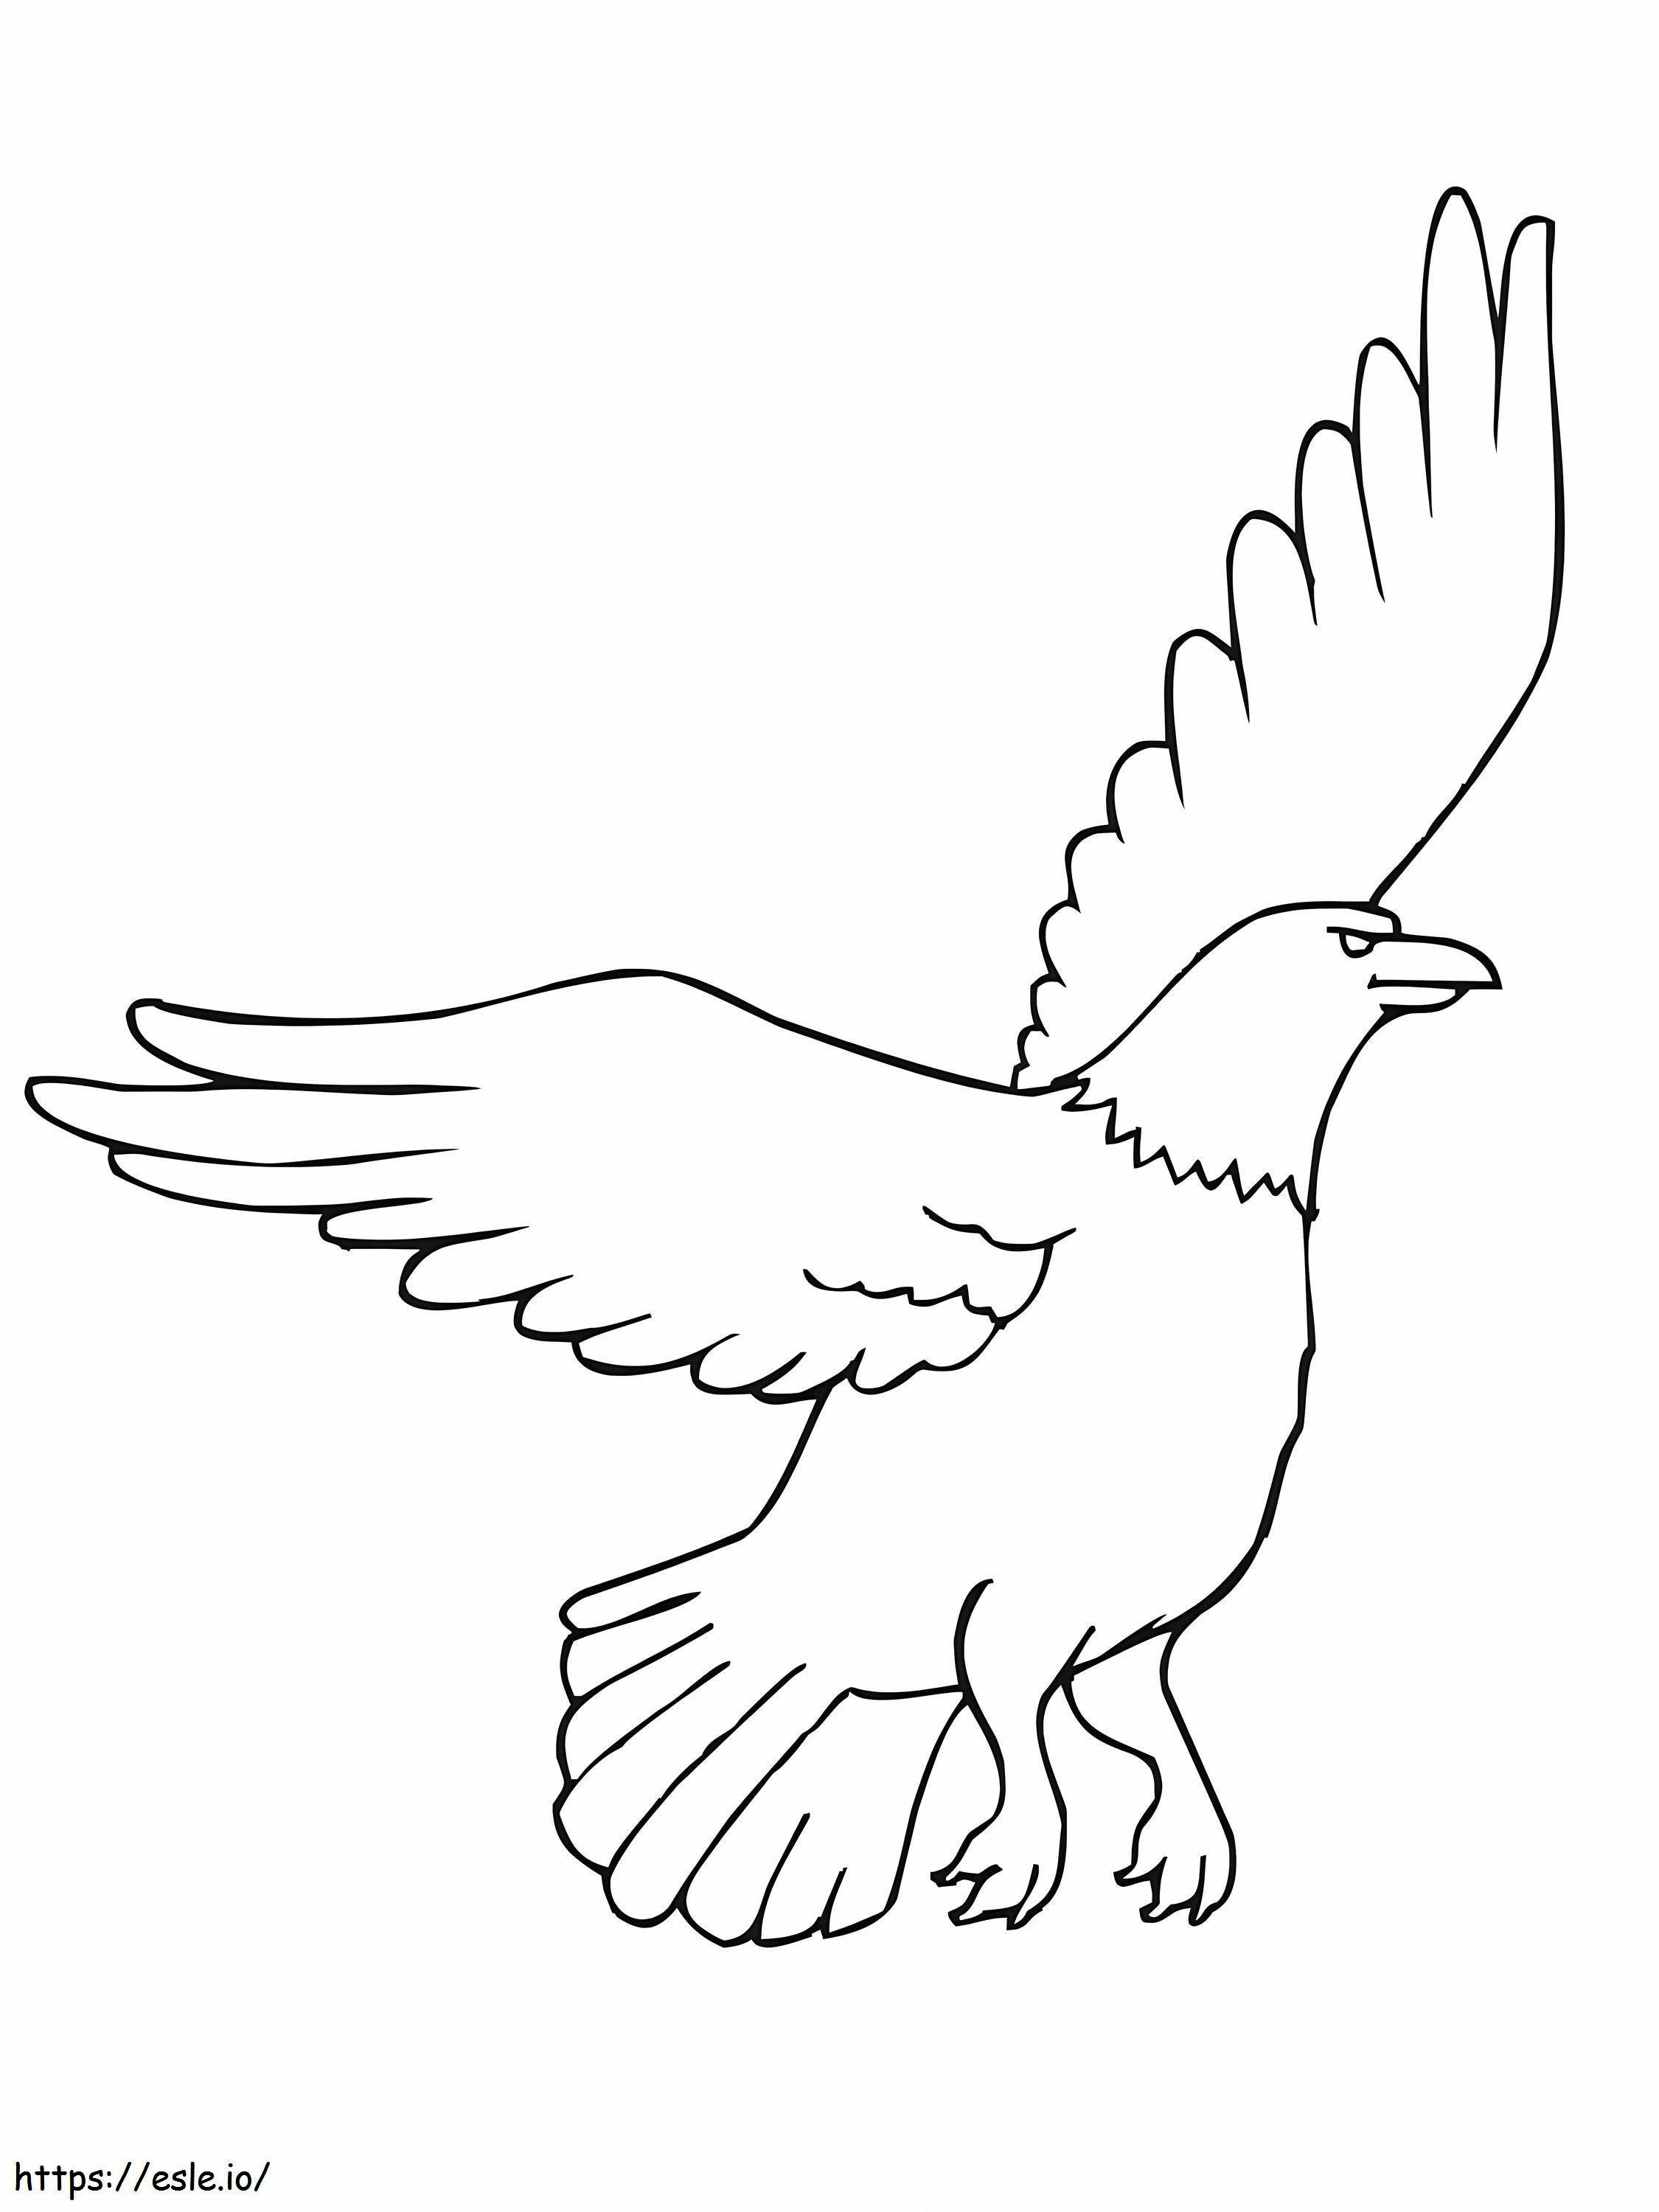 American Eagle coloring page